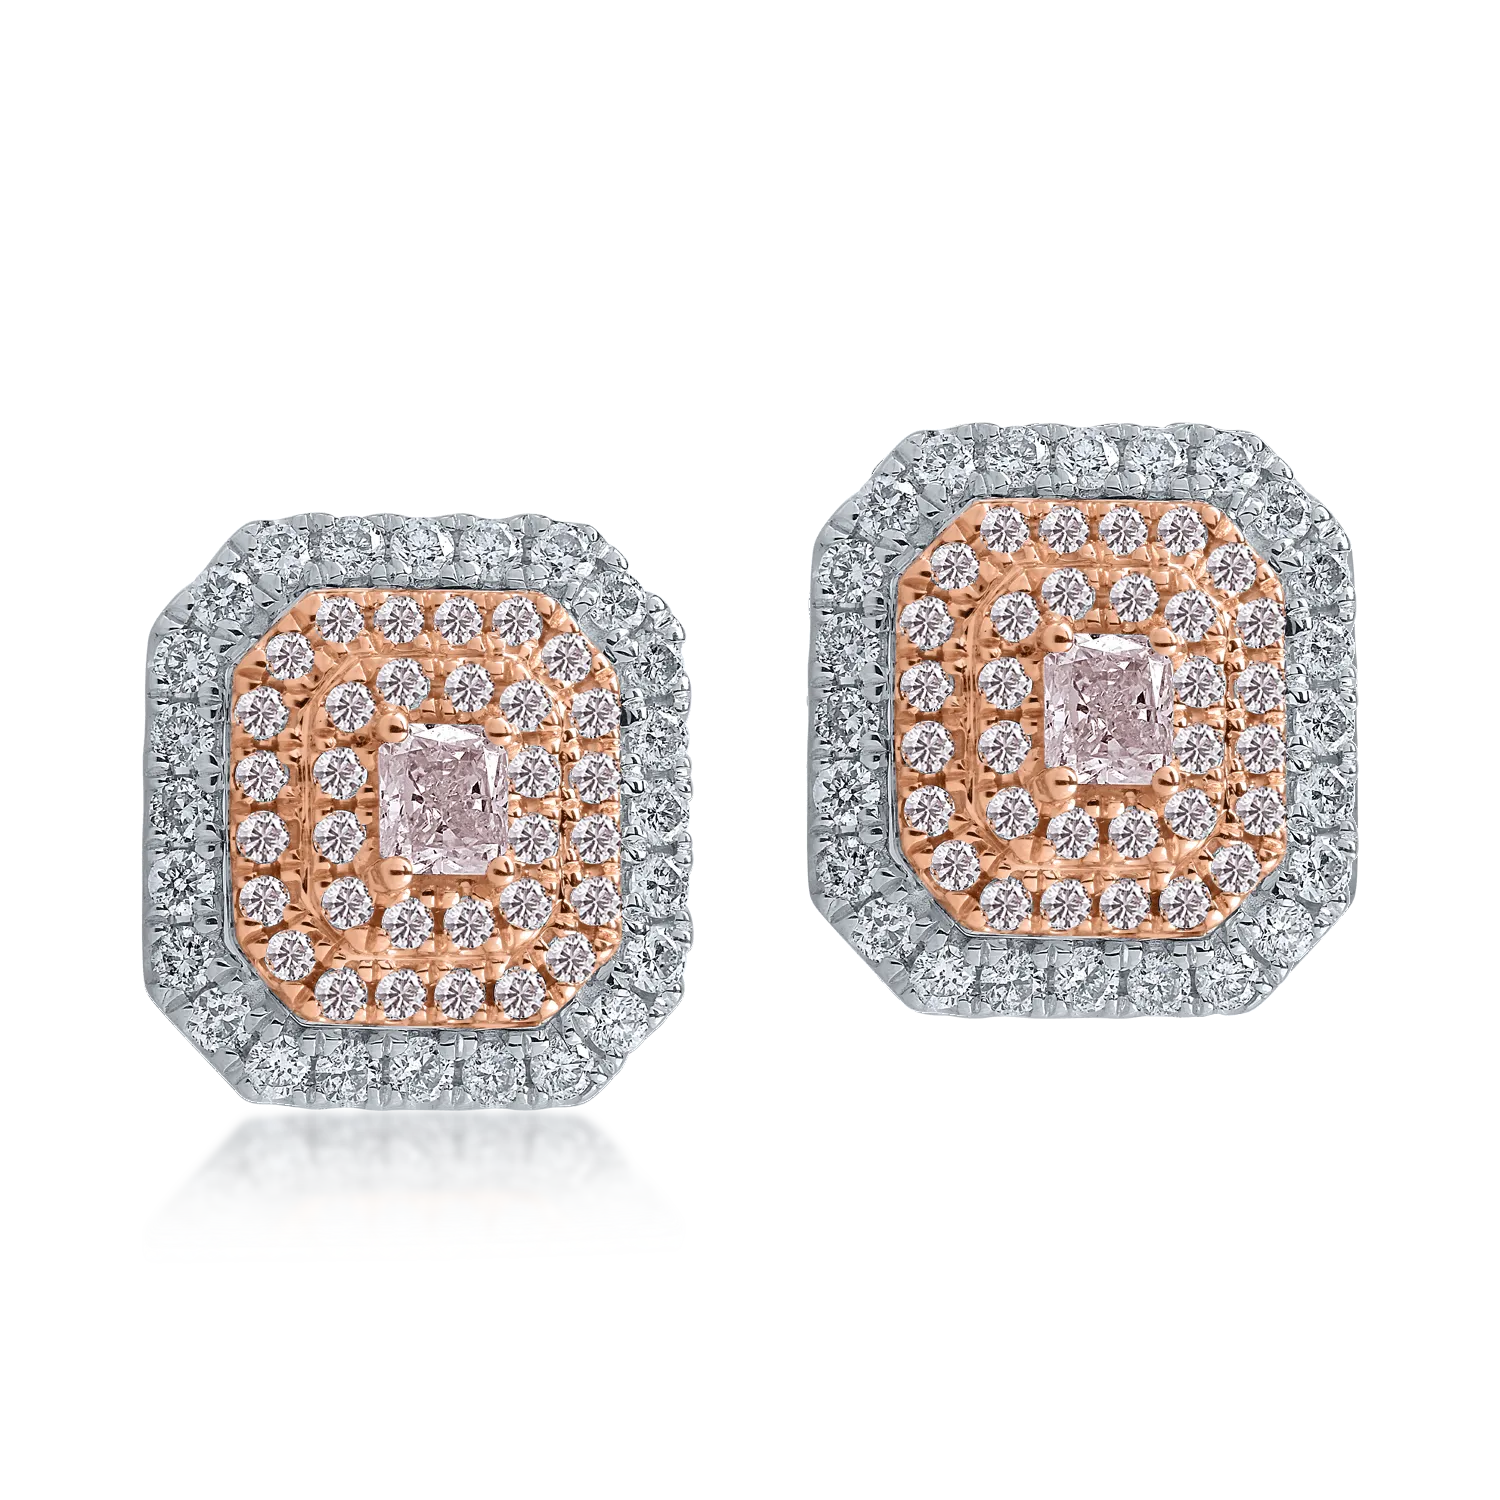 White-rose gold earrings with 0.62ct pink diamonds and 0.53ct clear diamonds